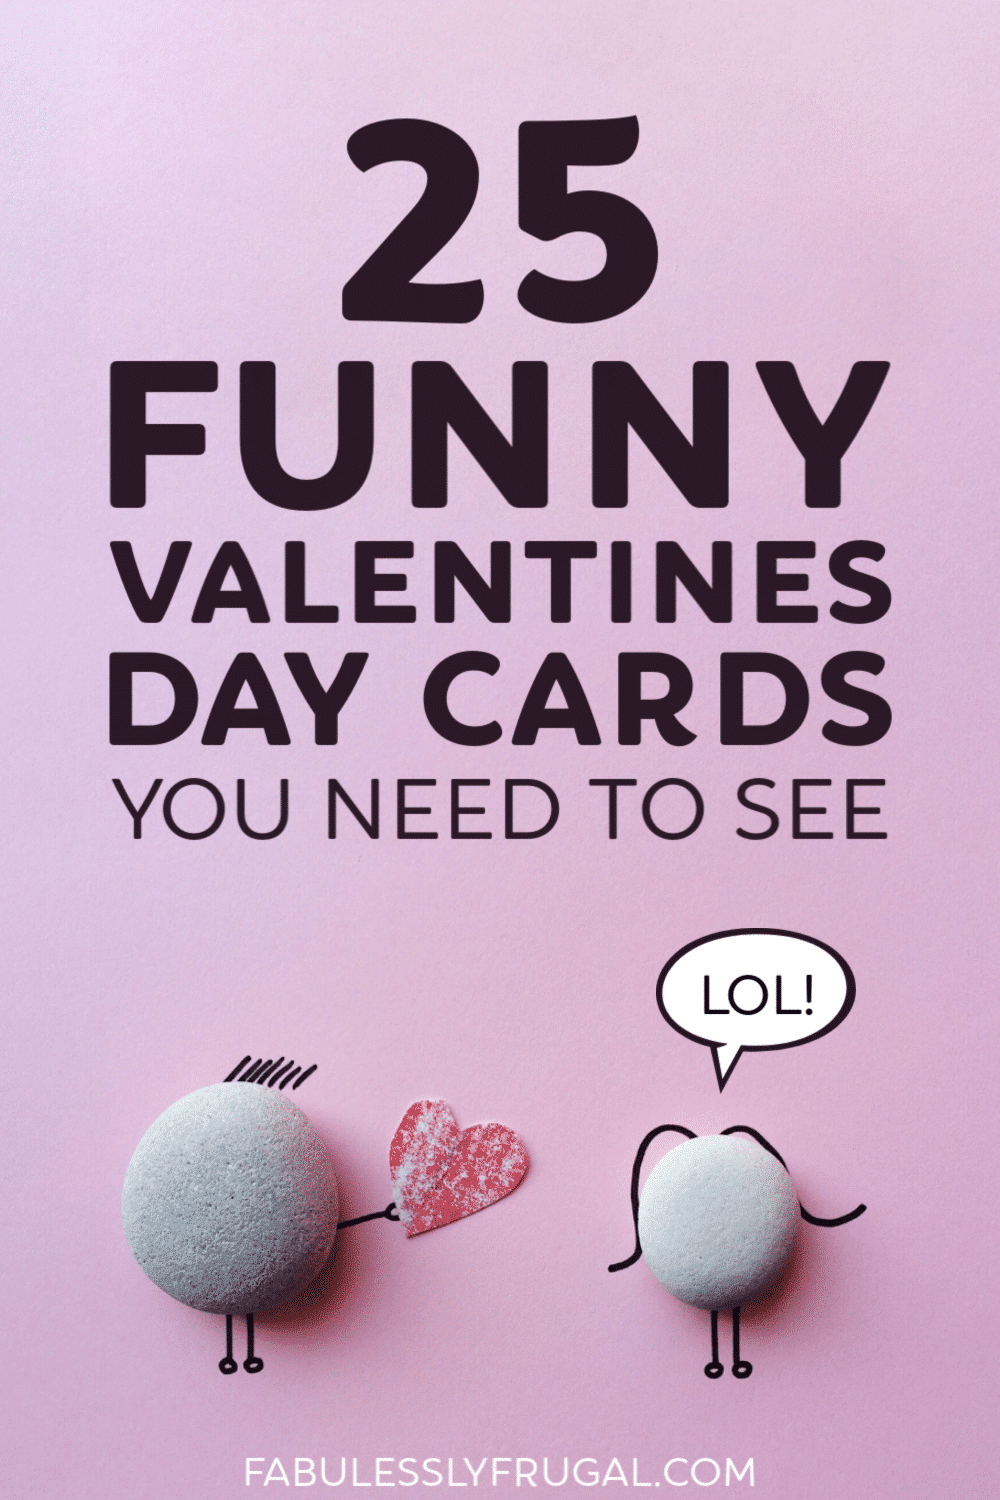 Funny Valentines day cards